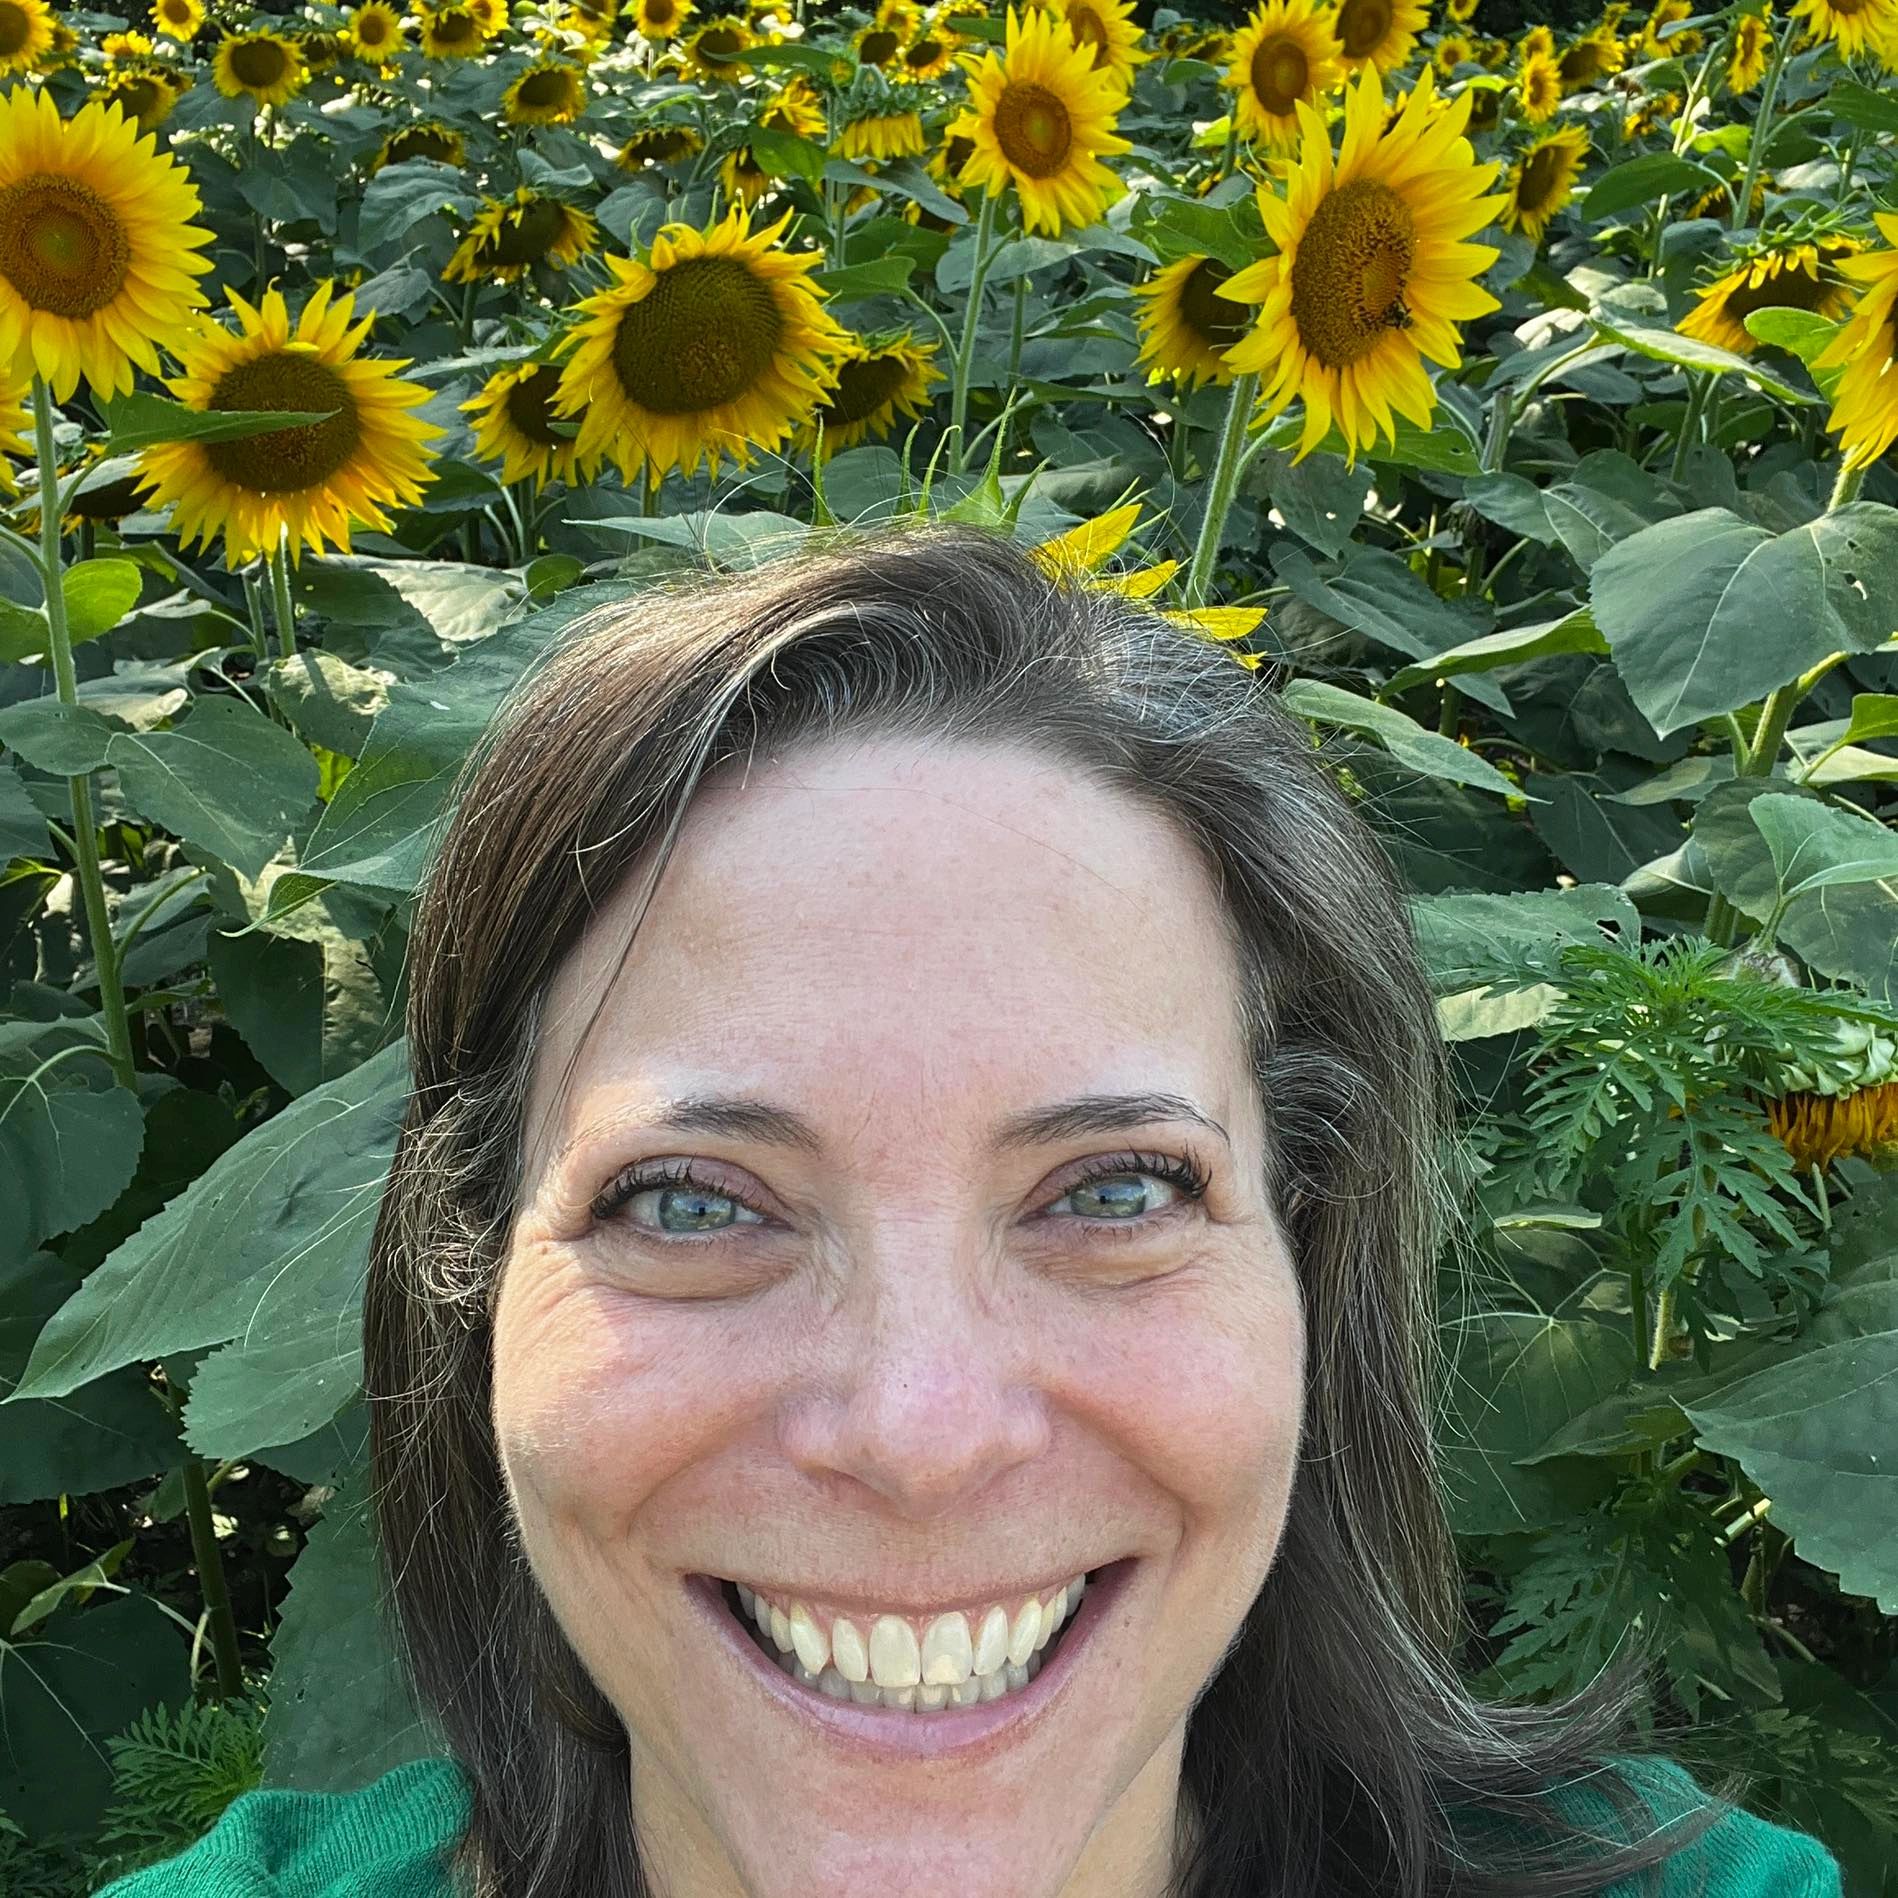 Amy smiling in a field of sunflowers